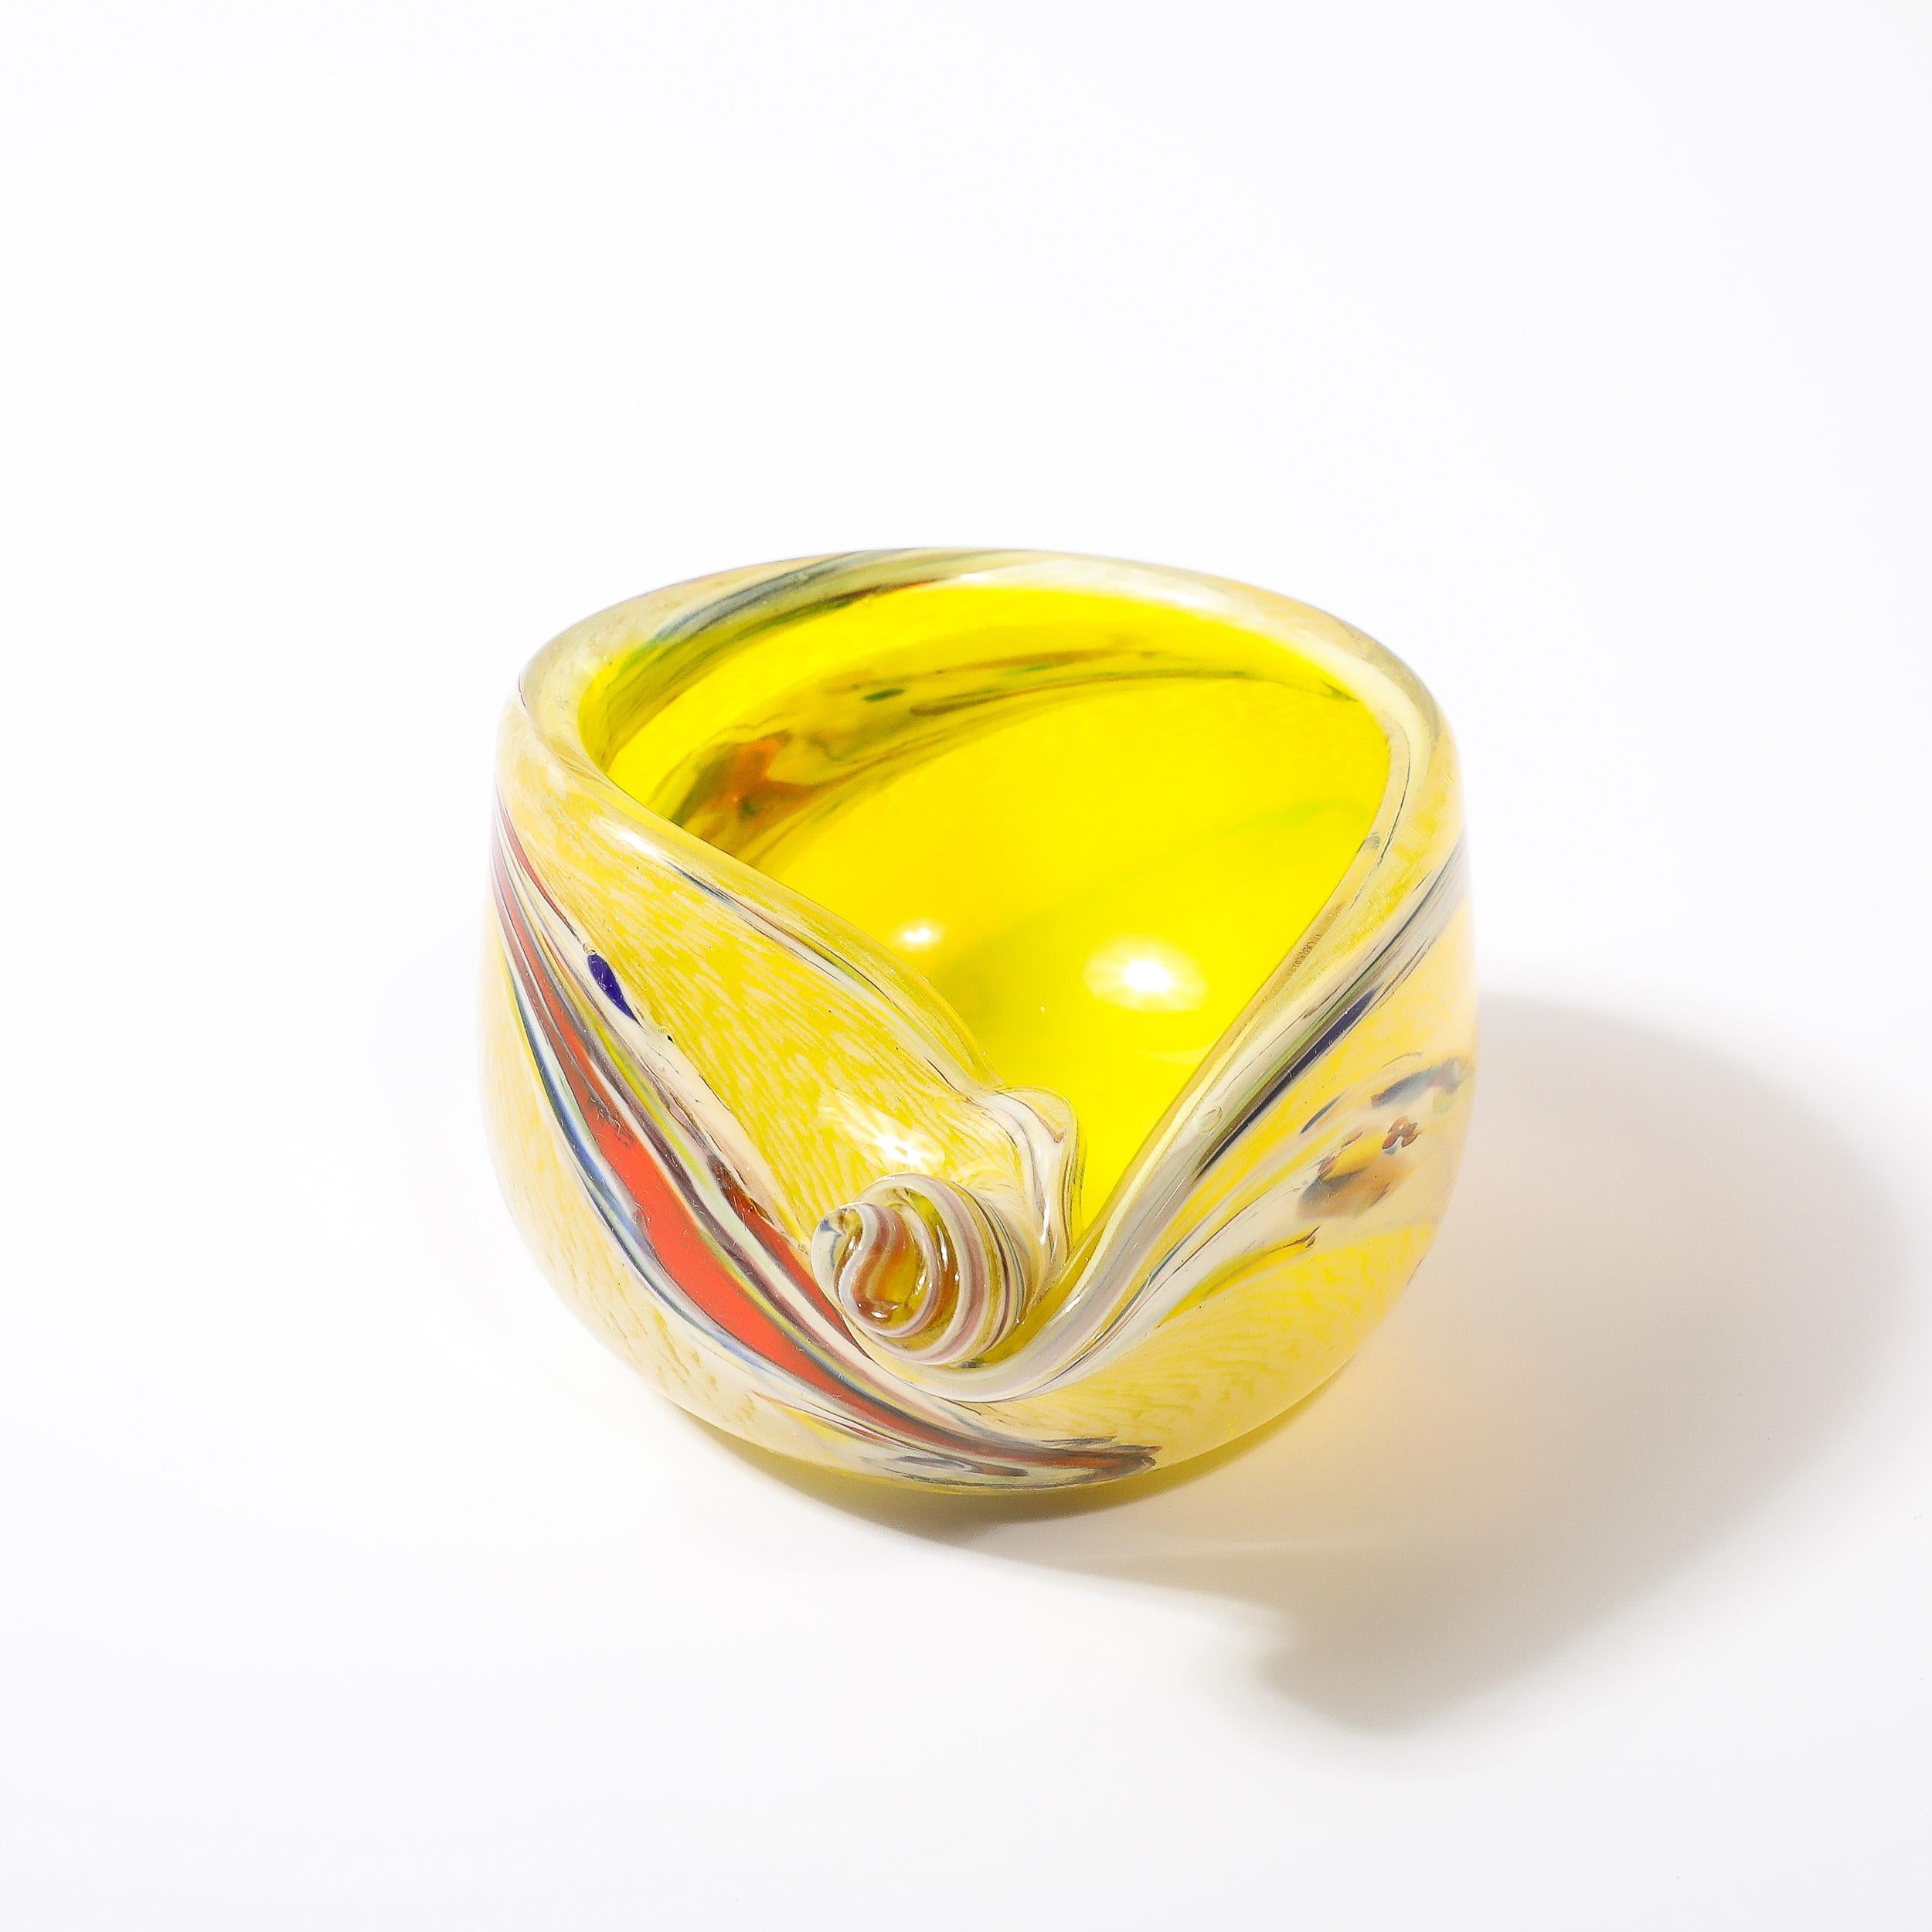 This lovely hued and elegantly achieved Mid-Century Modernist Hand-Blown Murano Glass Shell Form Bowl in Lemon Yellow with Striated Detailing originates from Italy, Circa 1960. Features a shell form profile with an asymmetrical spiraled twist detail